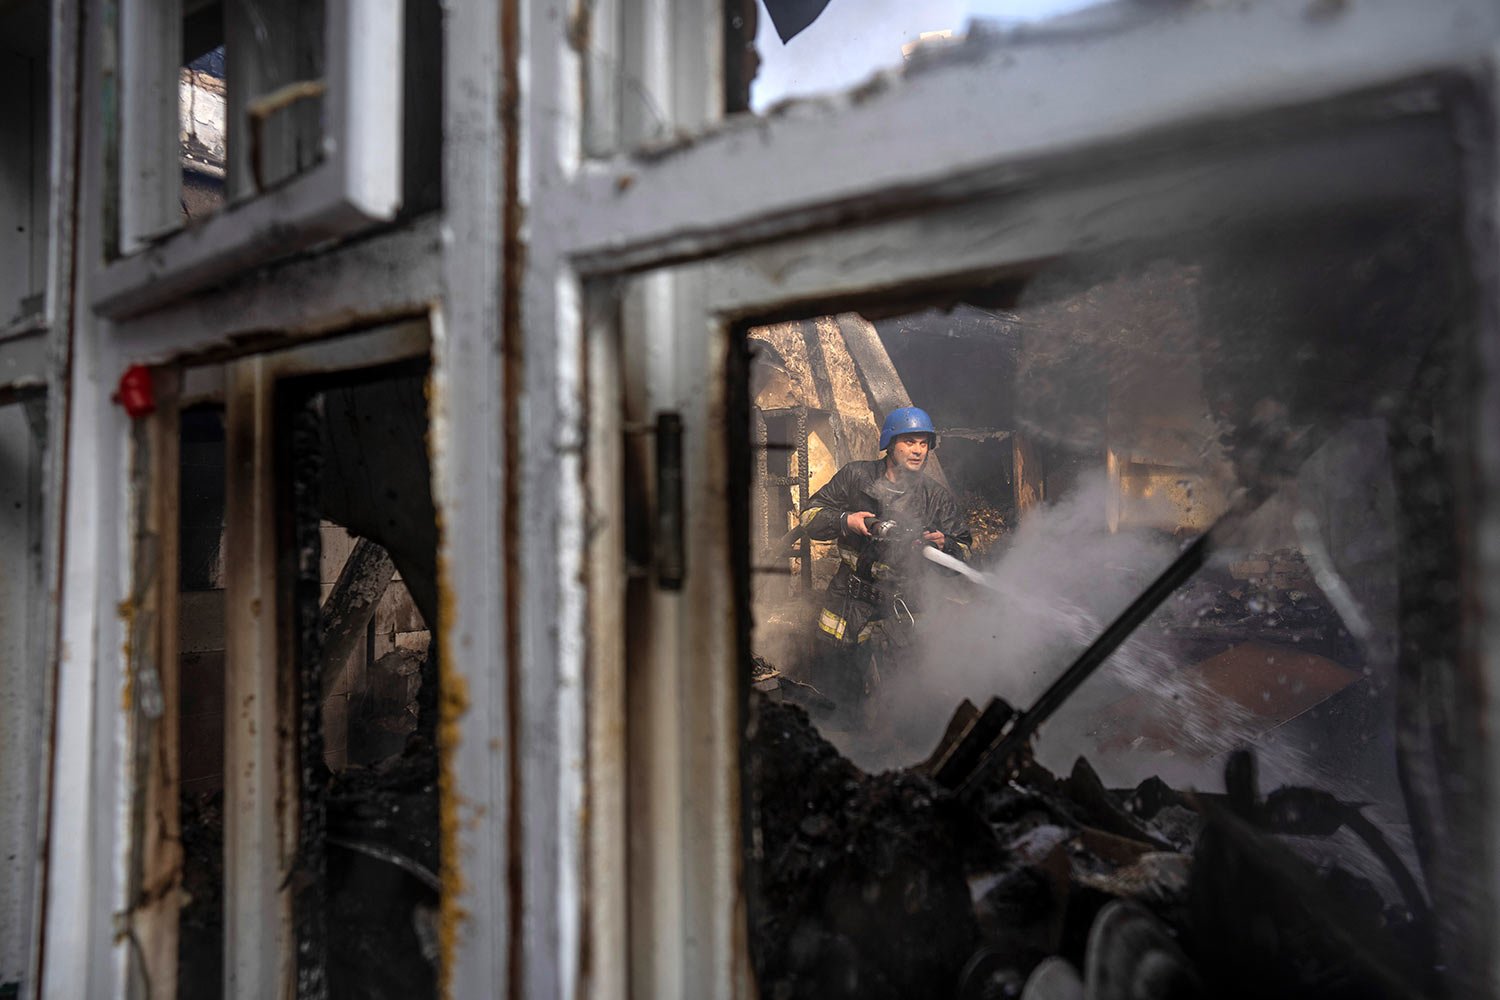  A Ukrainian firefighter tries to extinguish a fire inside a house destroyed by shelling in Kyiv, Ukraine, Wednesday, March 23, 2022. (AP Photo/Rodrigo Abd) 